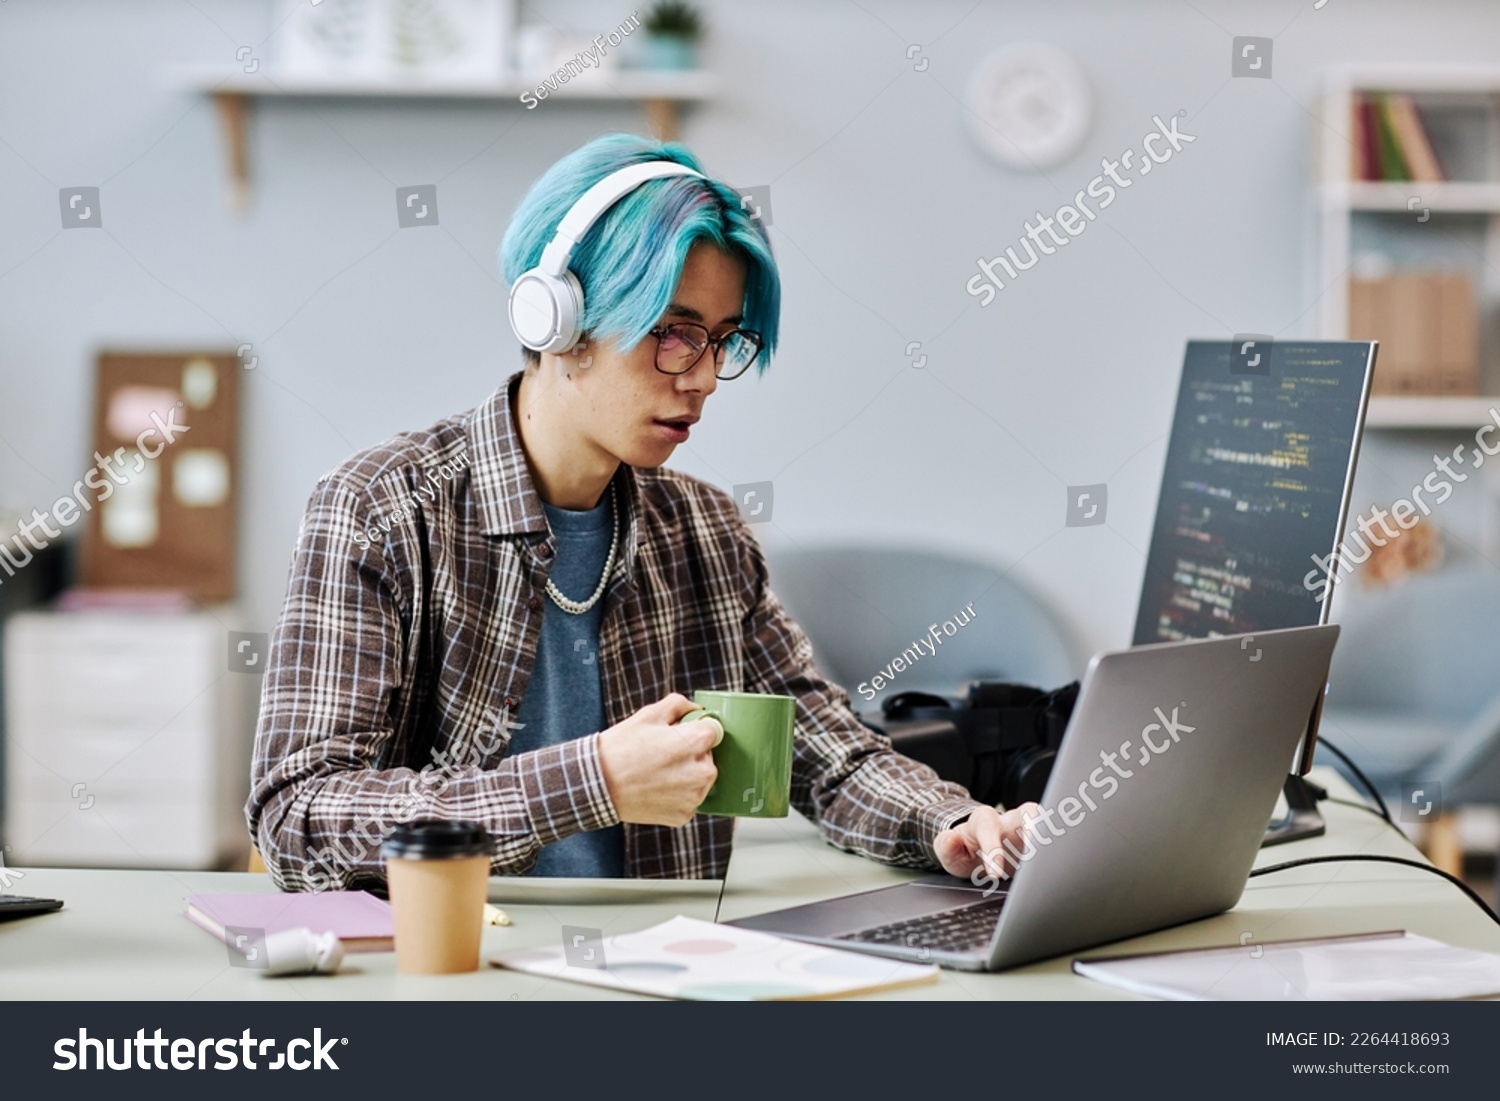 Portrait of young man with blue hair using computer in office and wearing headphones while writing code #2264418693